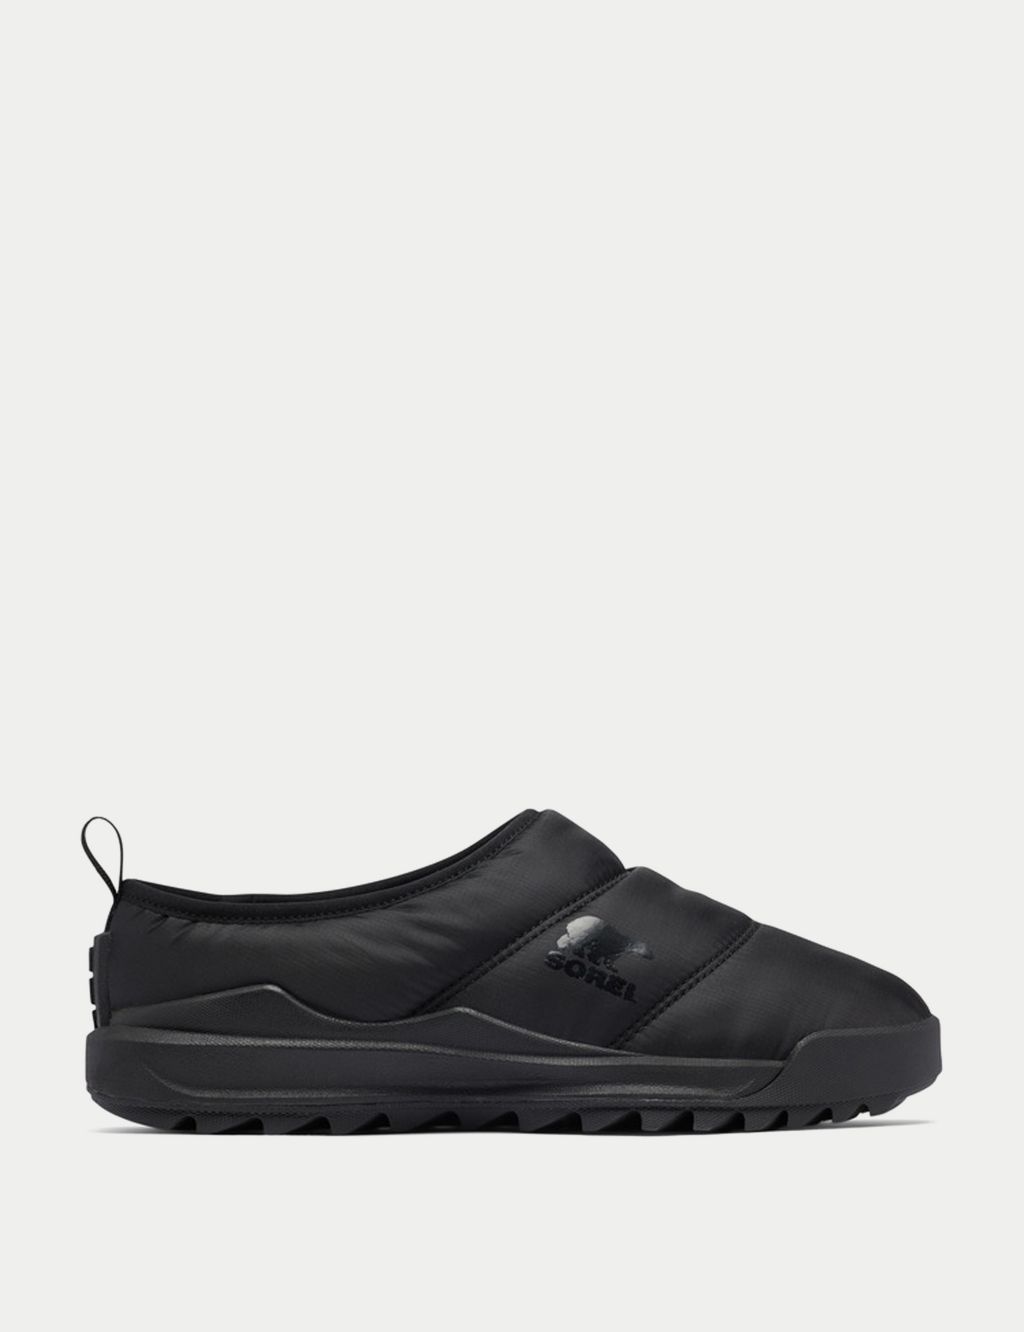 Ona RMX Puffy Quilted Slip On Mules image 1